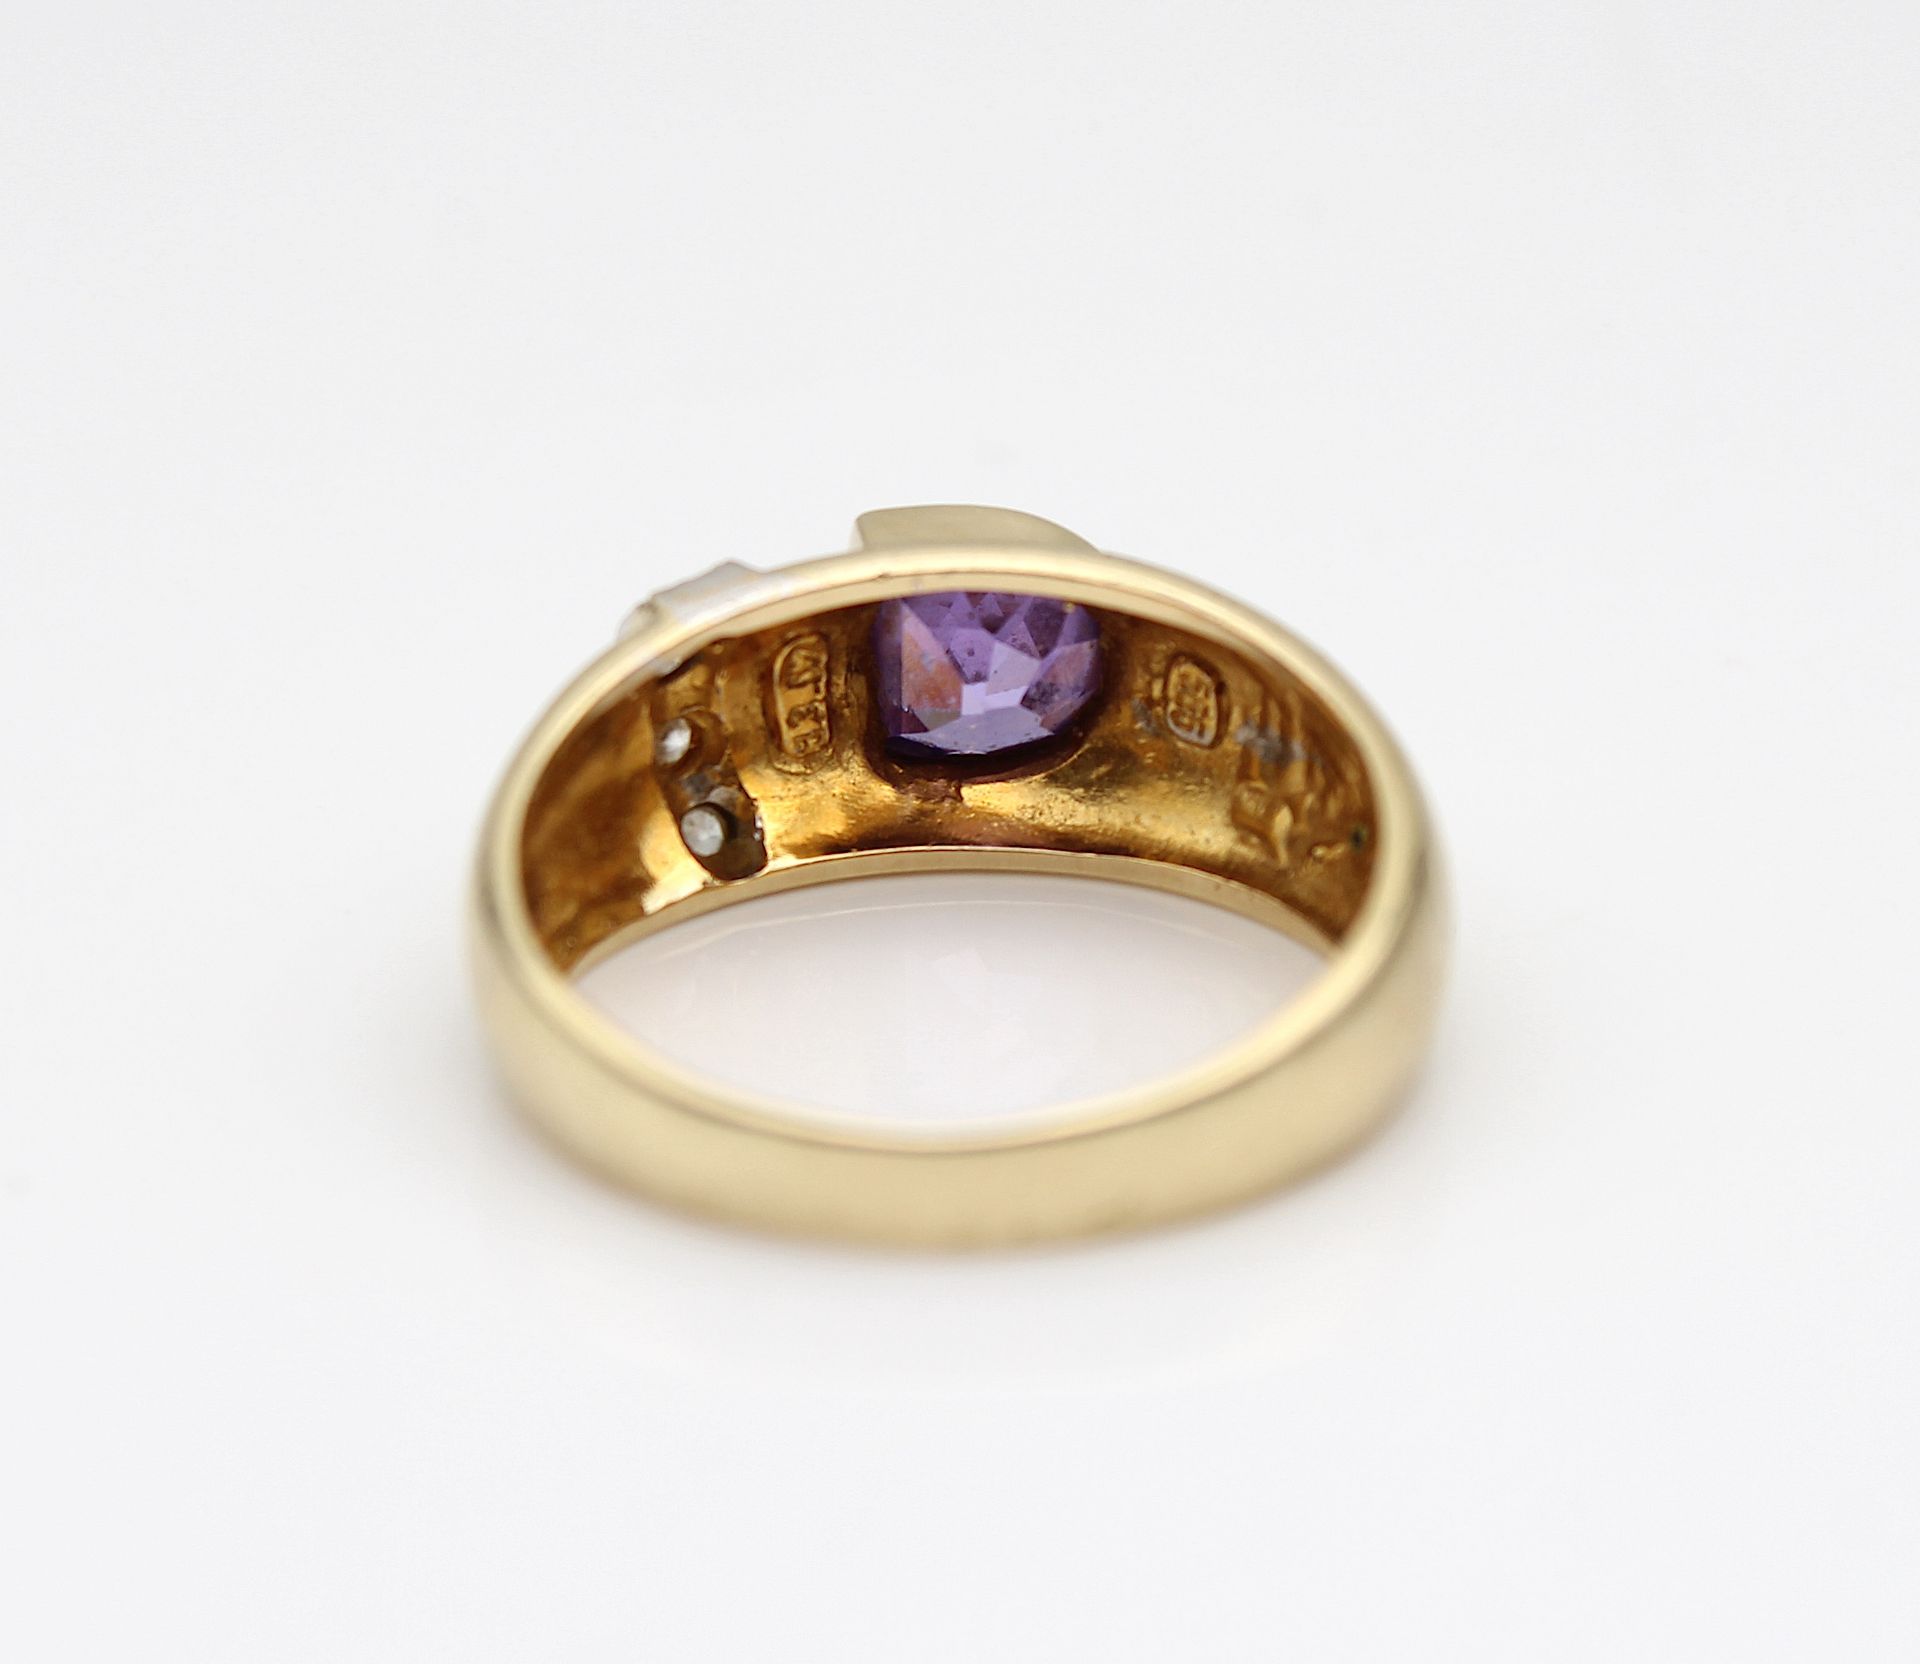 Decorative ring with colored cubic zirconia - Image 4 of 4